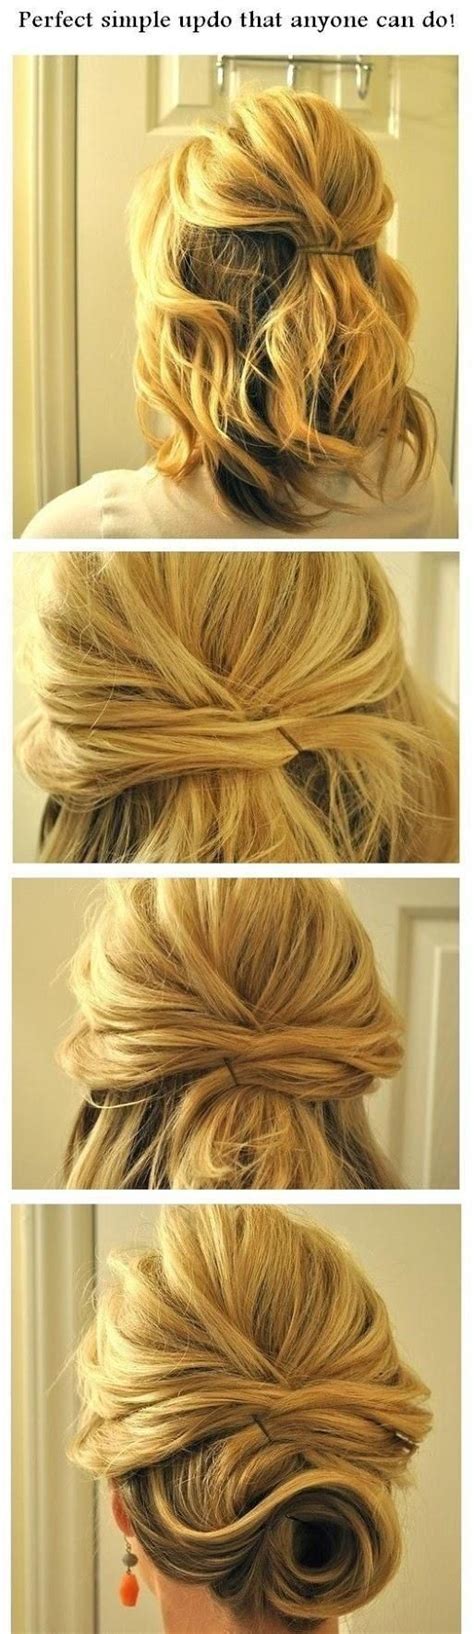 Don't try to contain your curls when you can let them thrive with messy yet cute styles. 12 Short Updo Hairstyles Ideas: Anyone Can Do - PoPular Haircuts